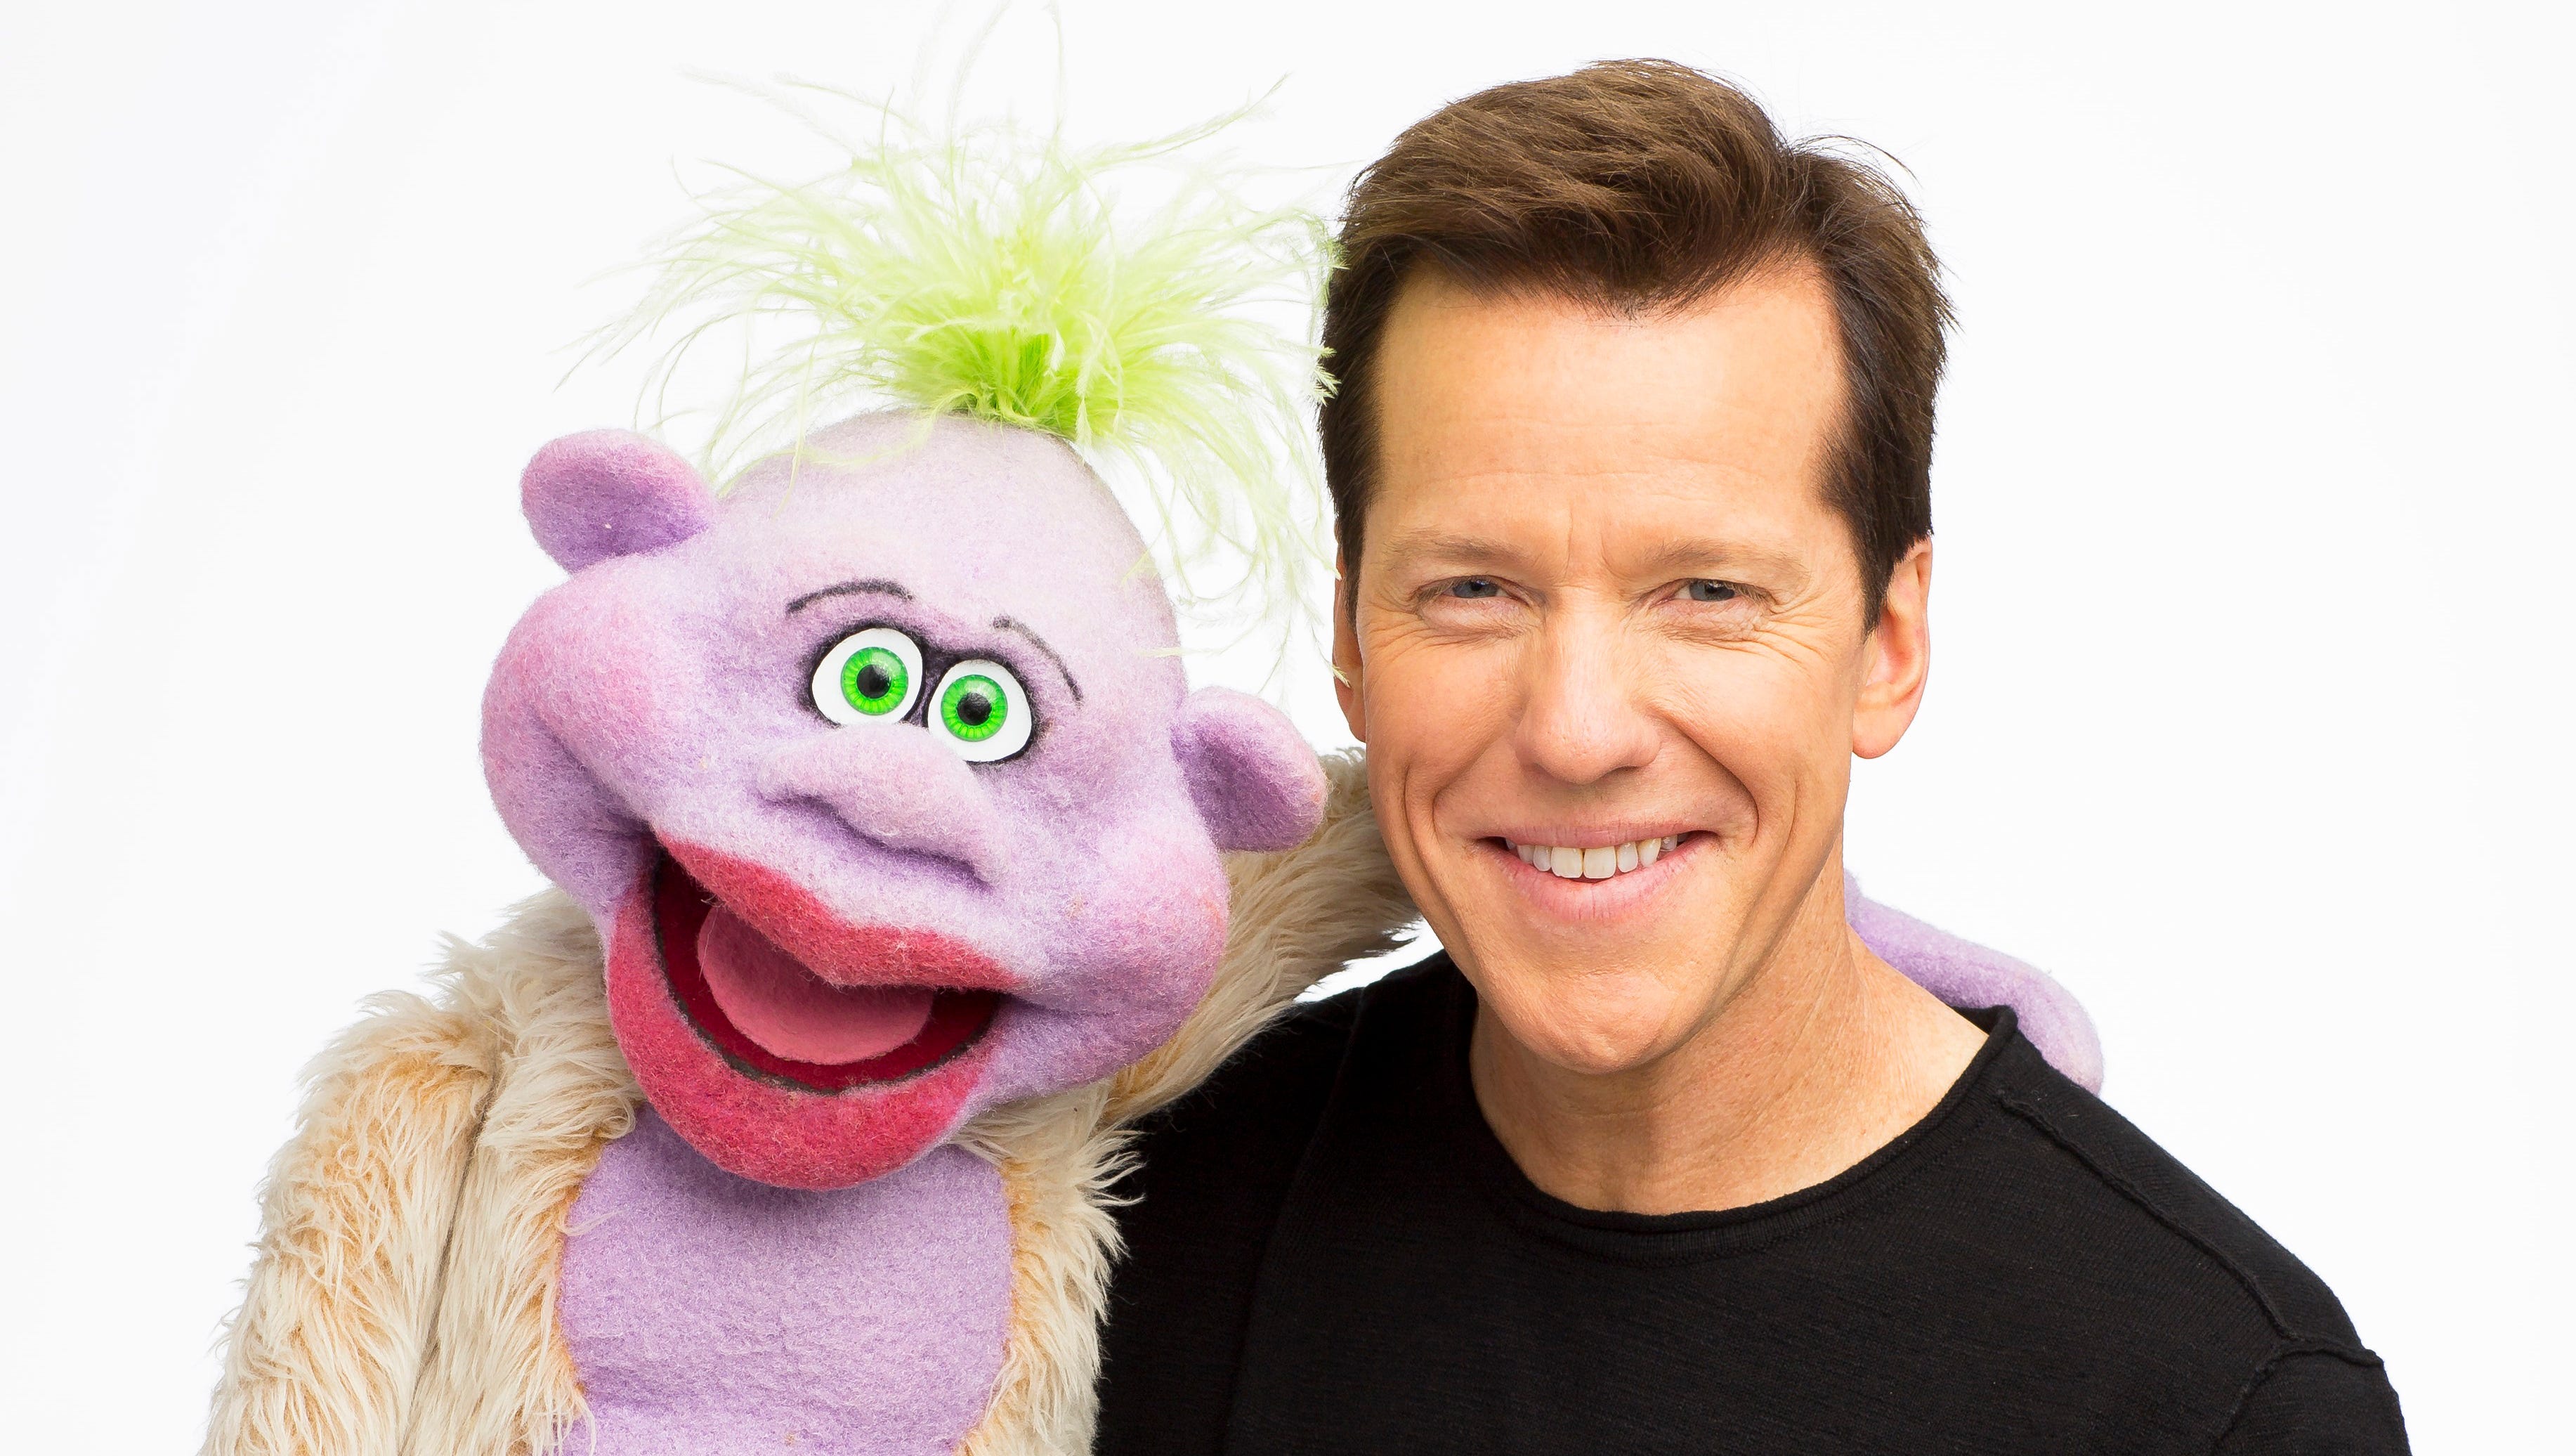 Jeff Dunham pictures and photo gallery.